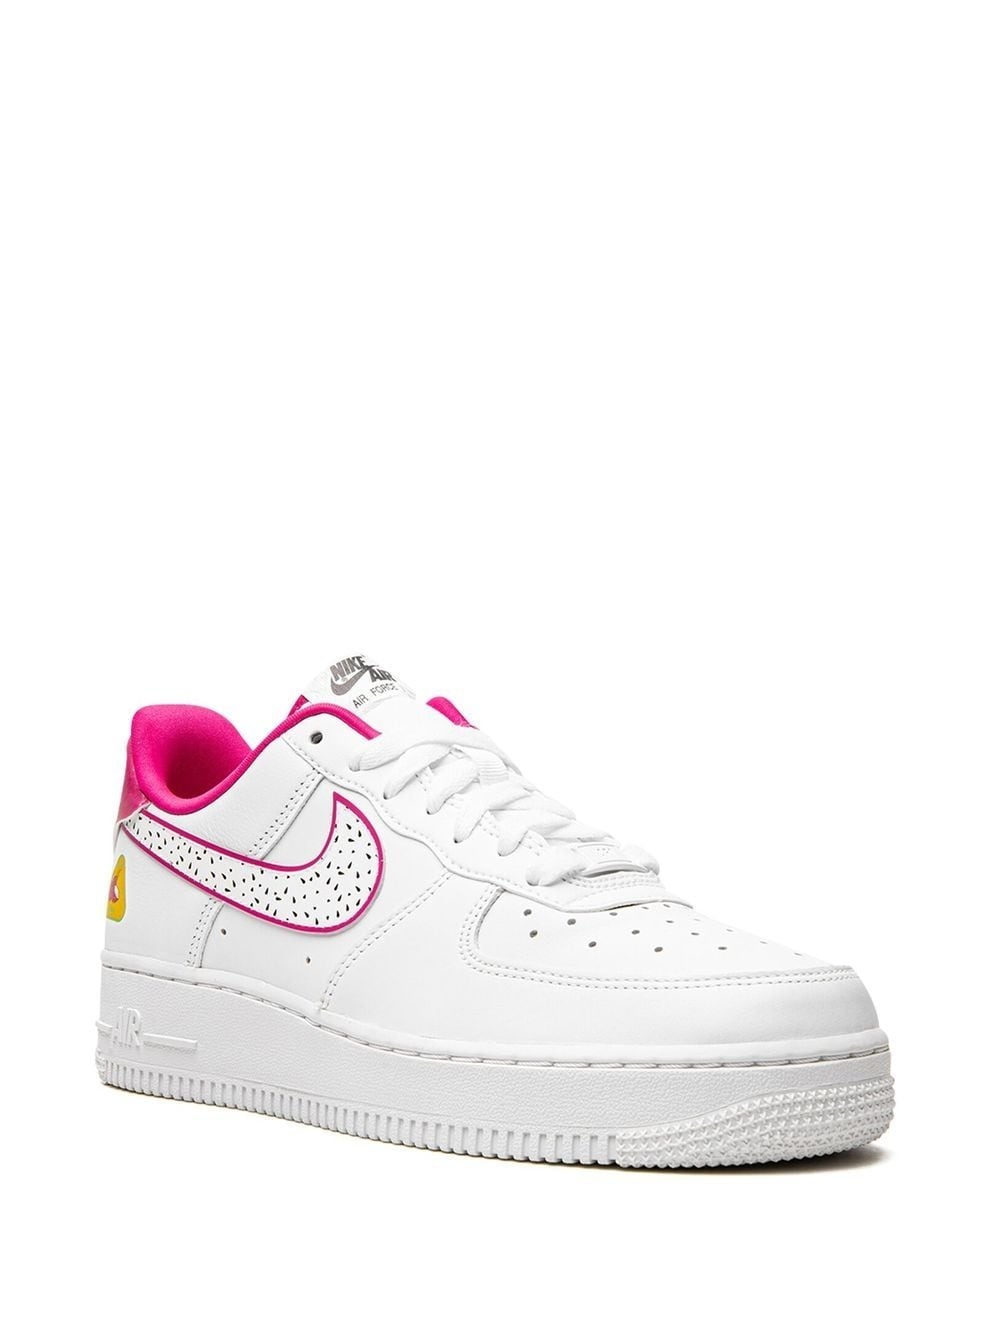 Air Force 1 '07 LX "Dragon Fruit" sneakers - 2